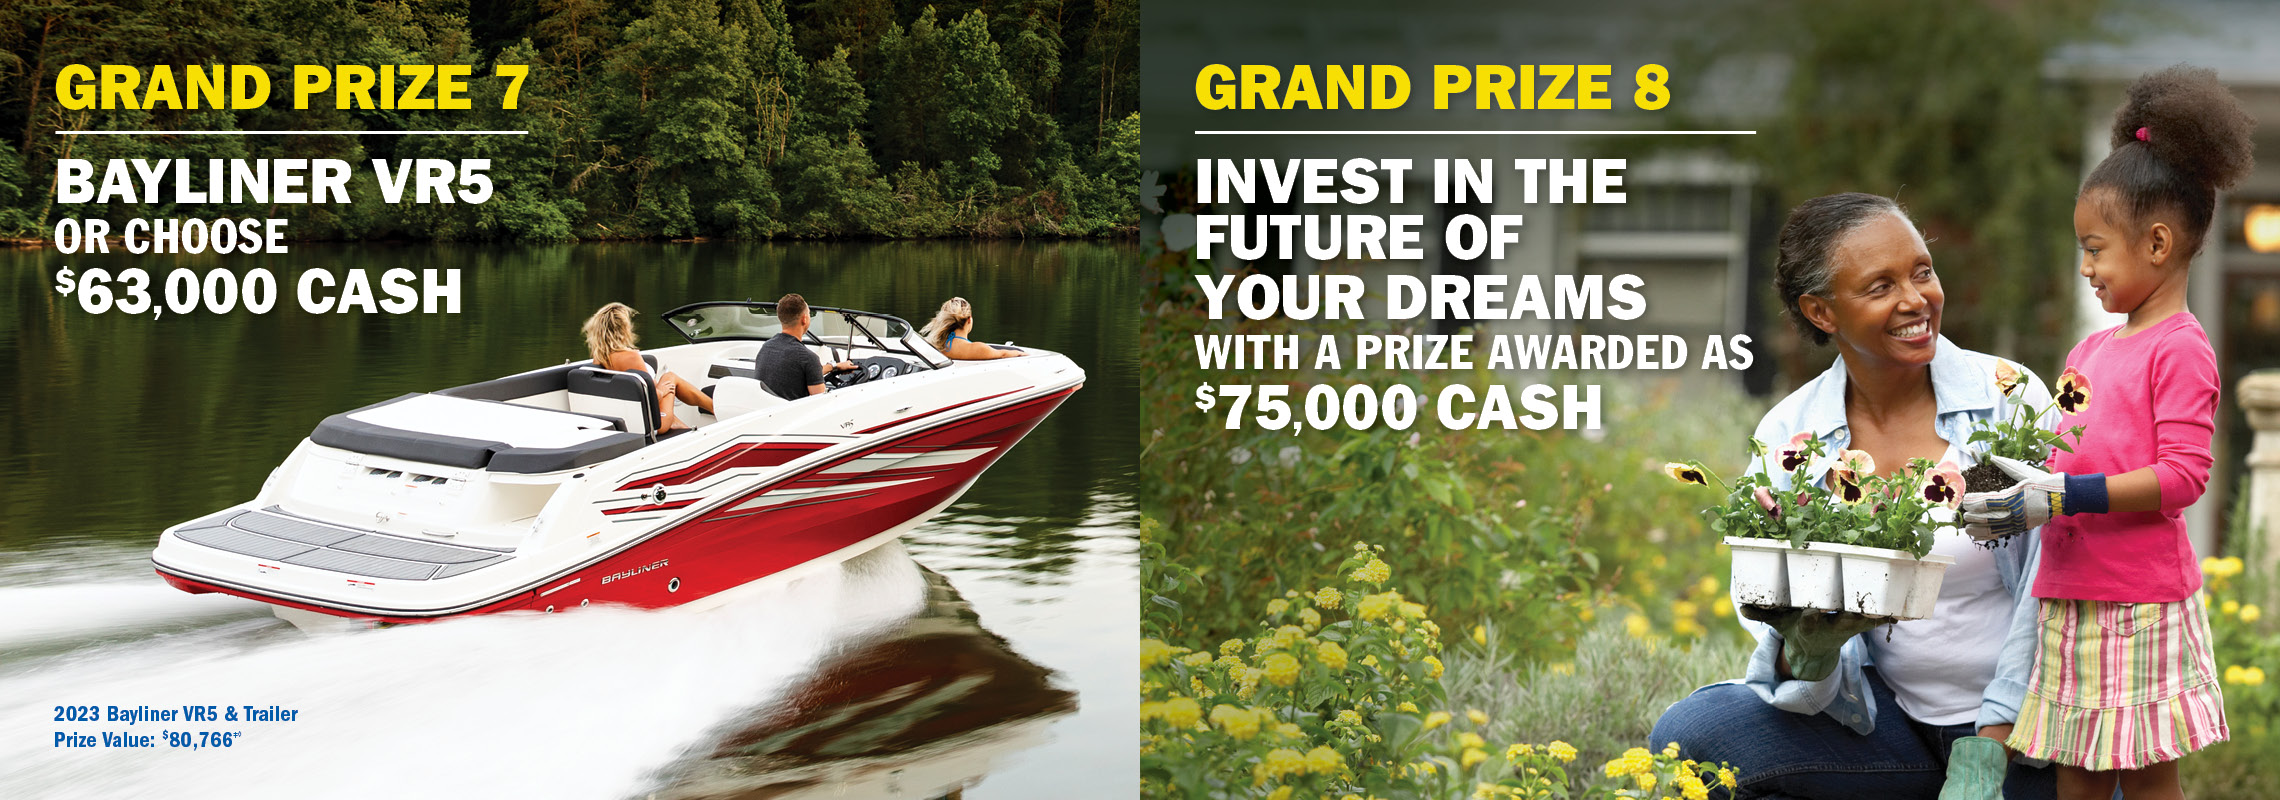 Grand Prize 7 - Build your dream space with $75,000 cash. Grand Prize 8 - Build your ultimate adventure with $65,000 cash.